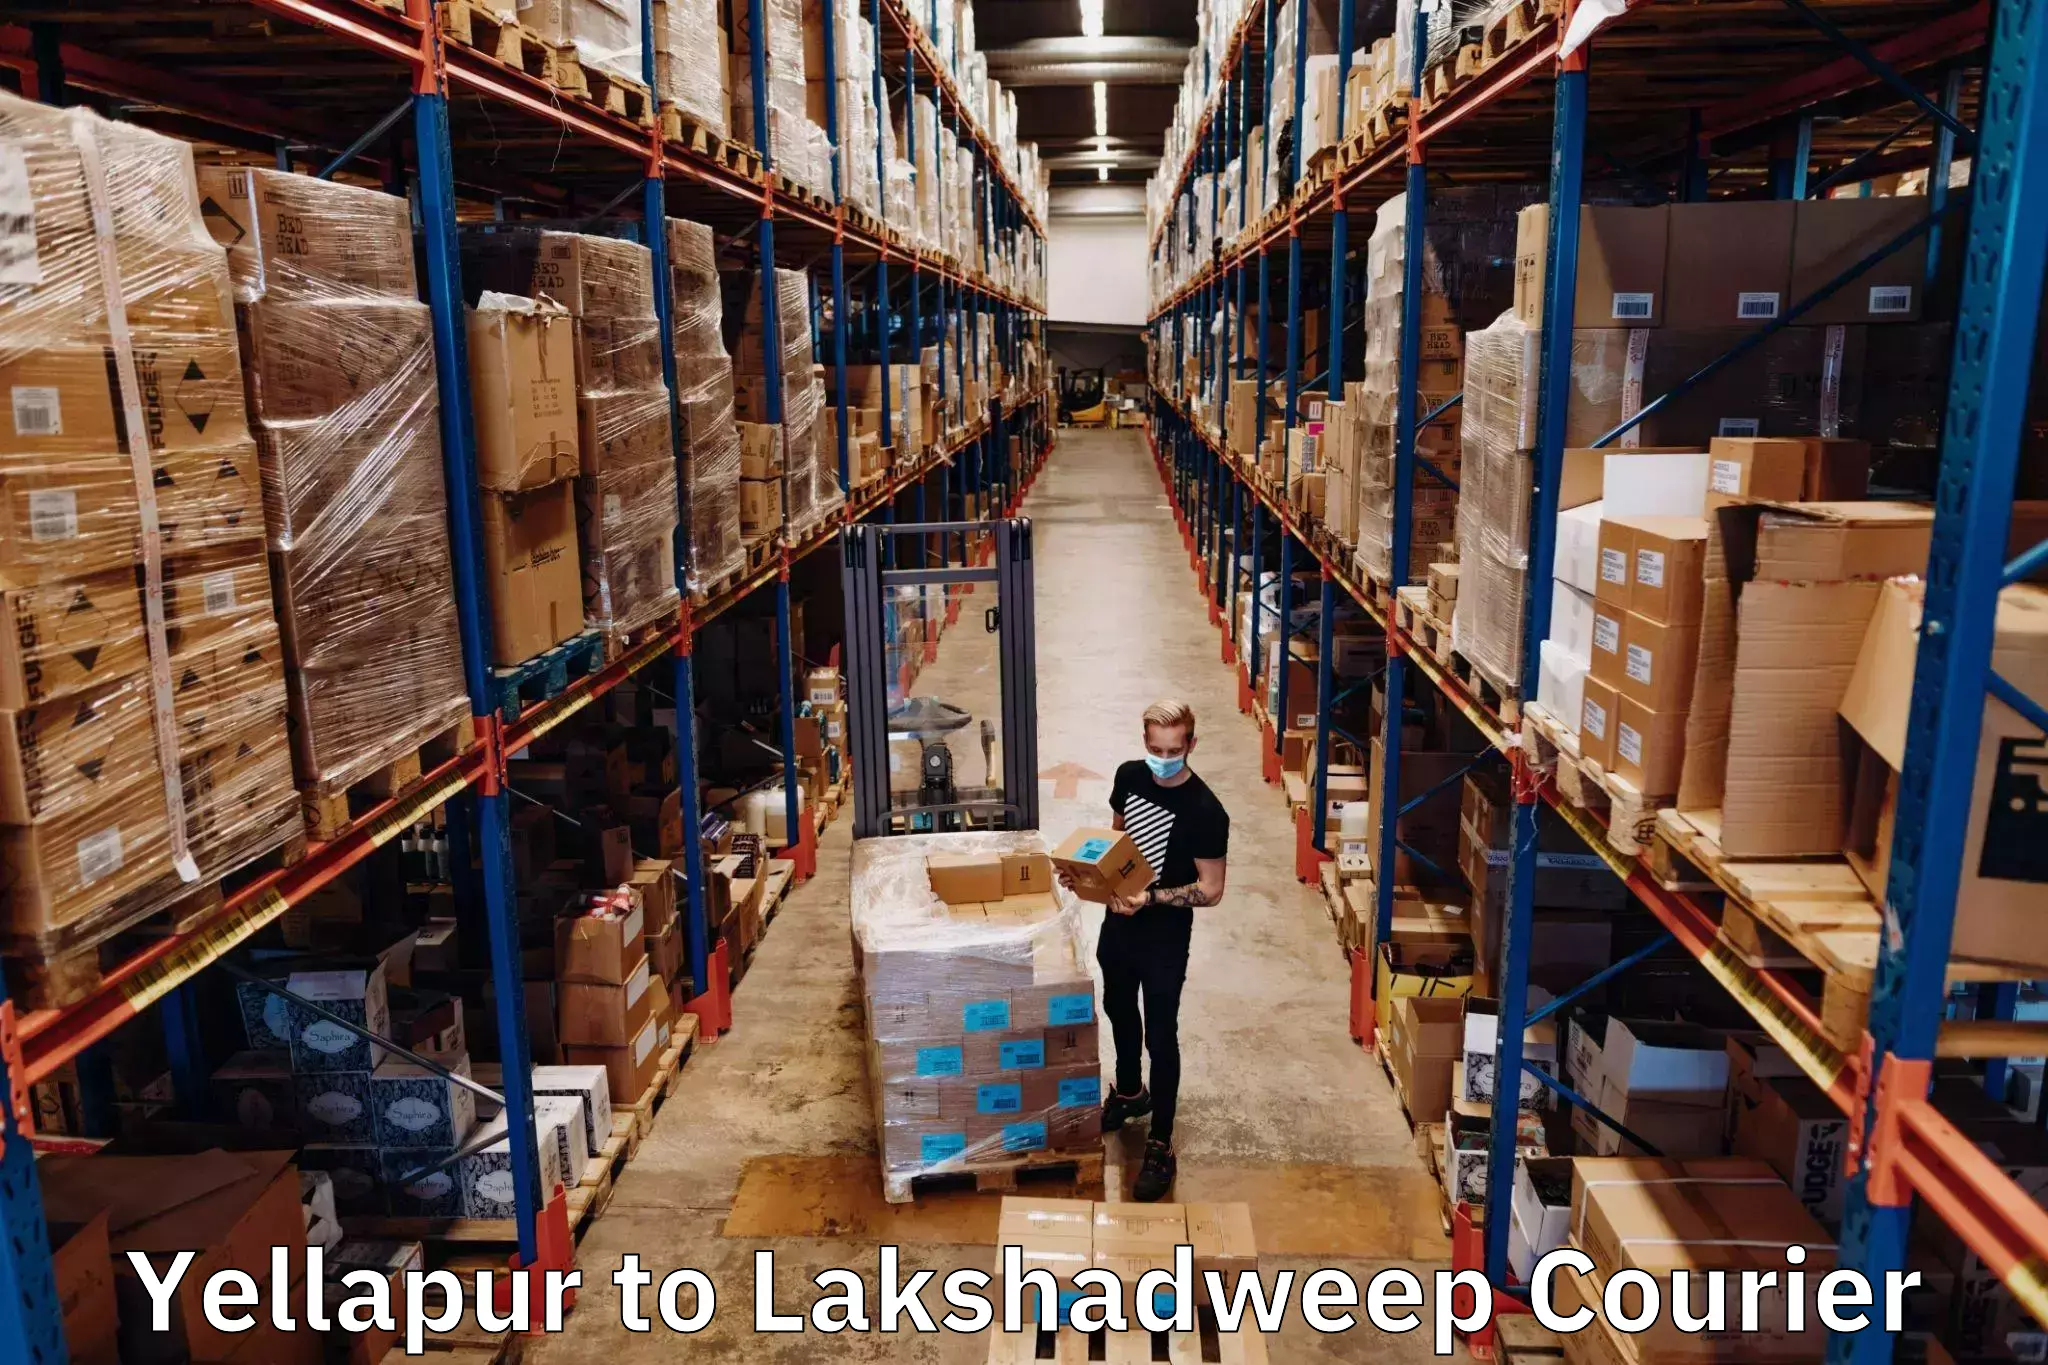 Automated parcel services Yellapur to Lakshadweep